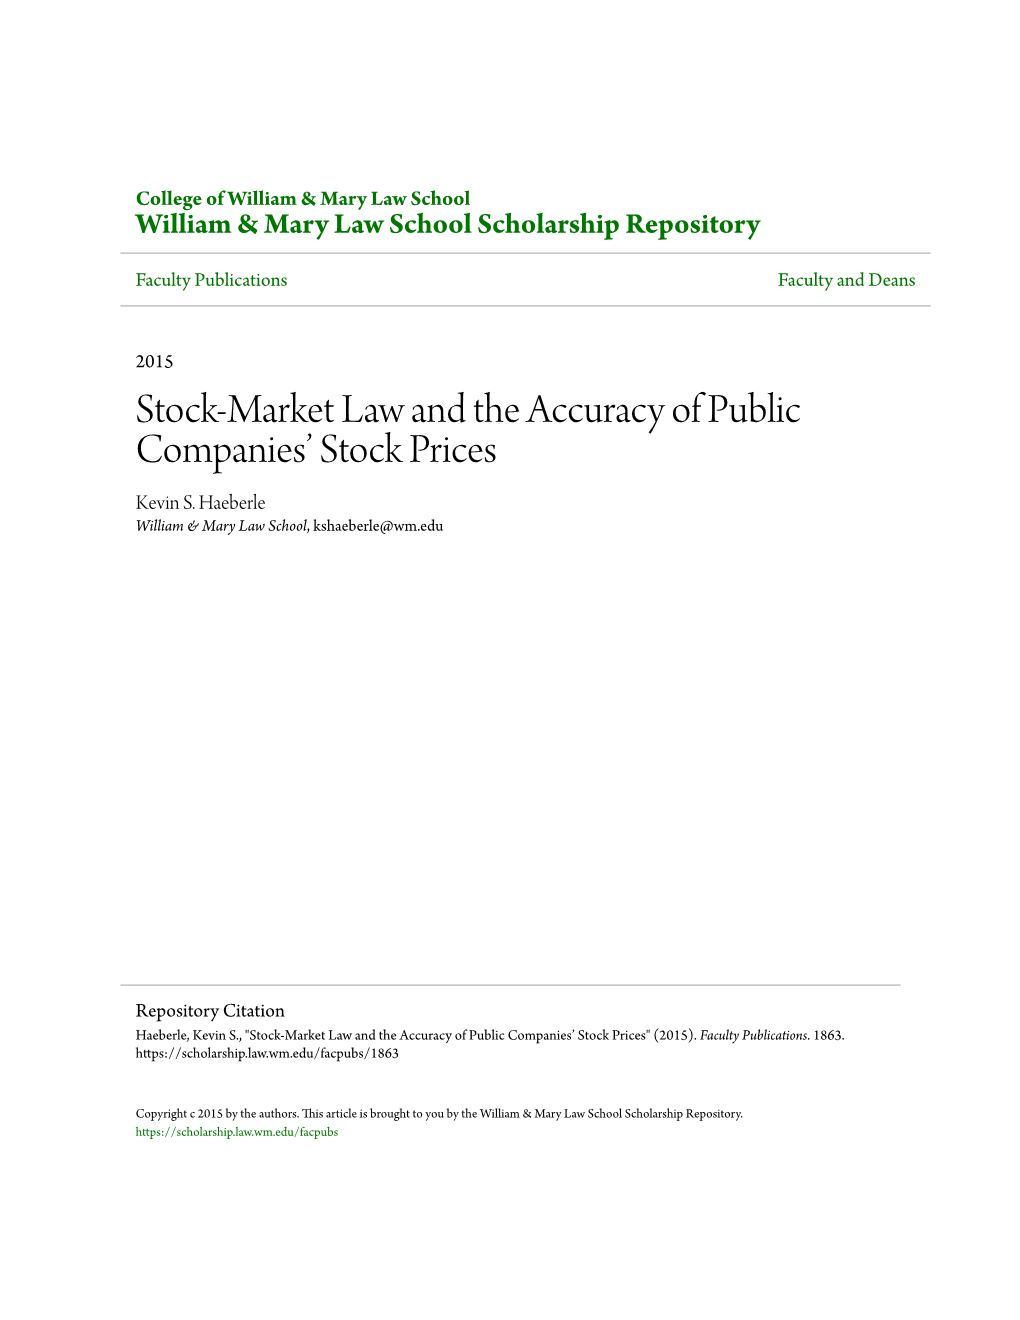 Stock-Market Law and the Accuracy of Public Companies' Stock Prices